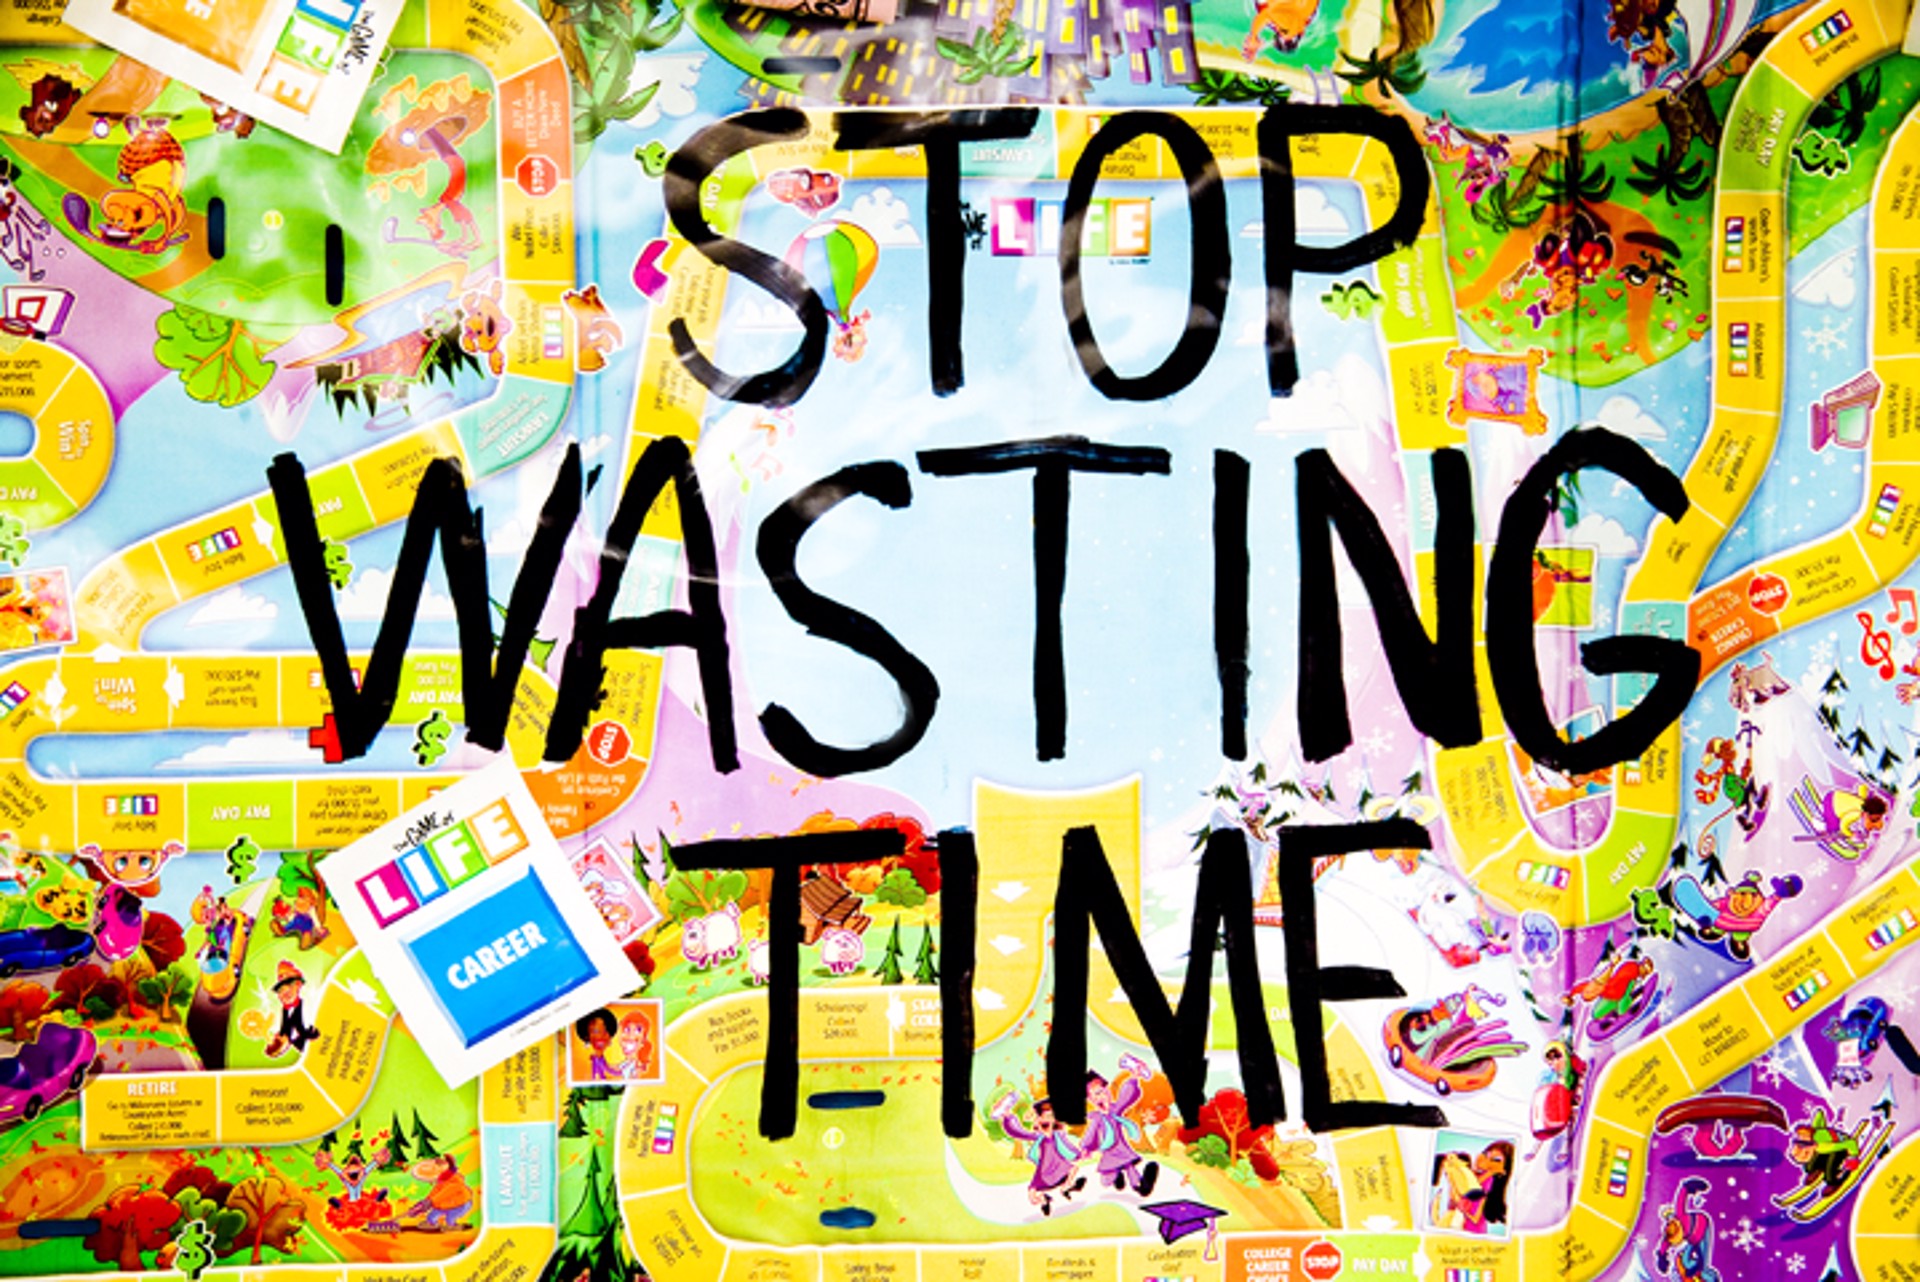 Stop Wasting Time by Tyler Shields